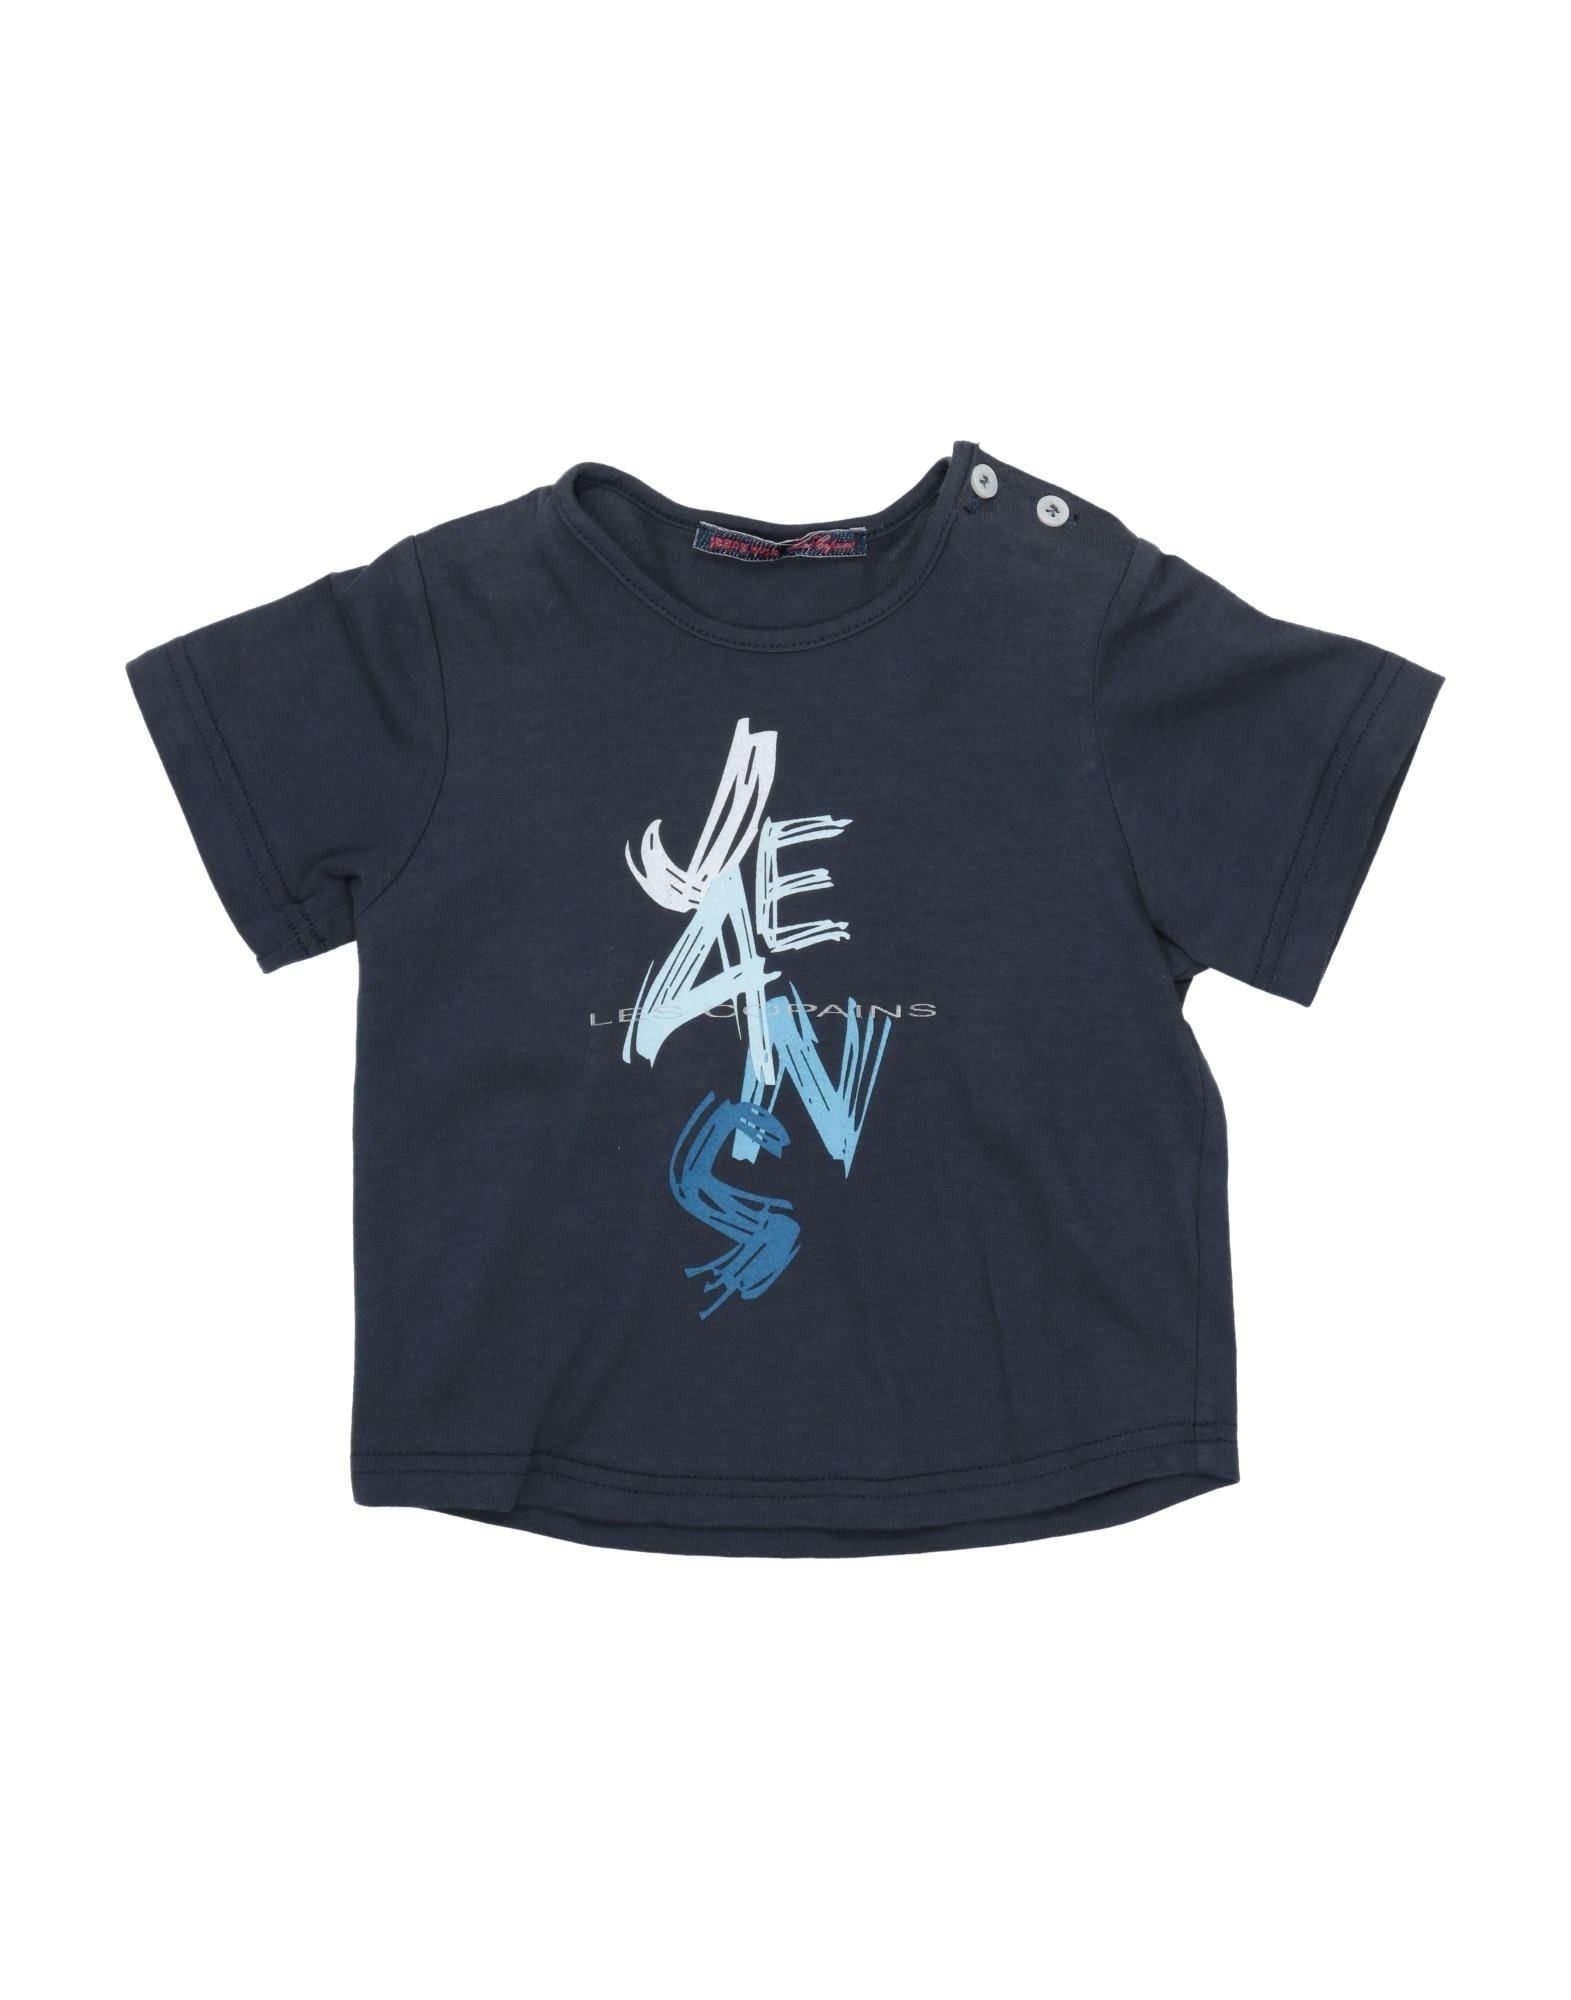 Jeans Les Copains Kids' T-shirts In Dark Blue